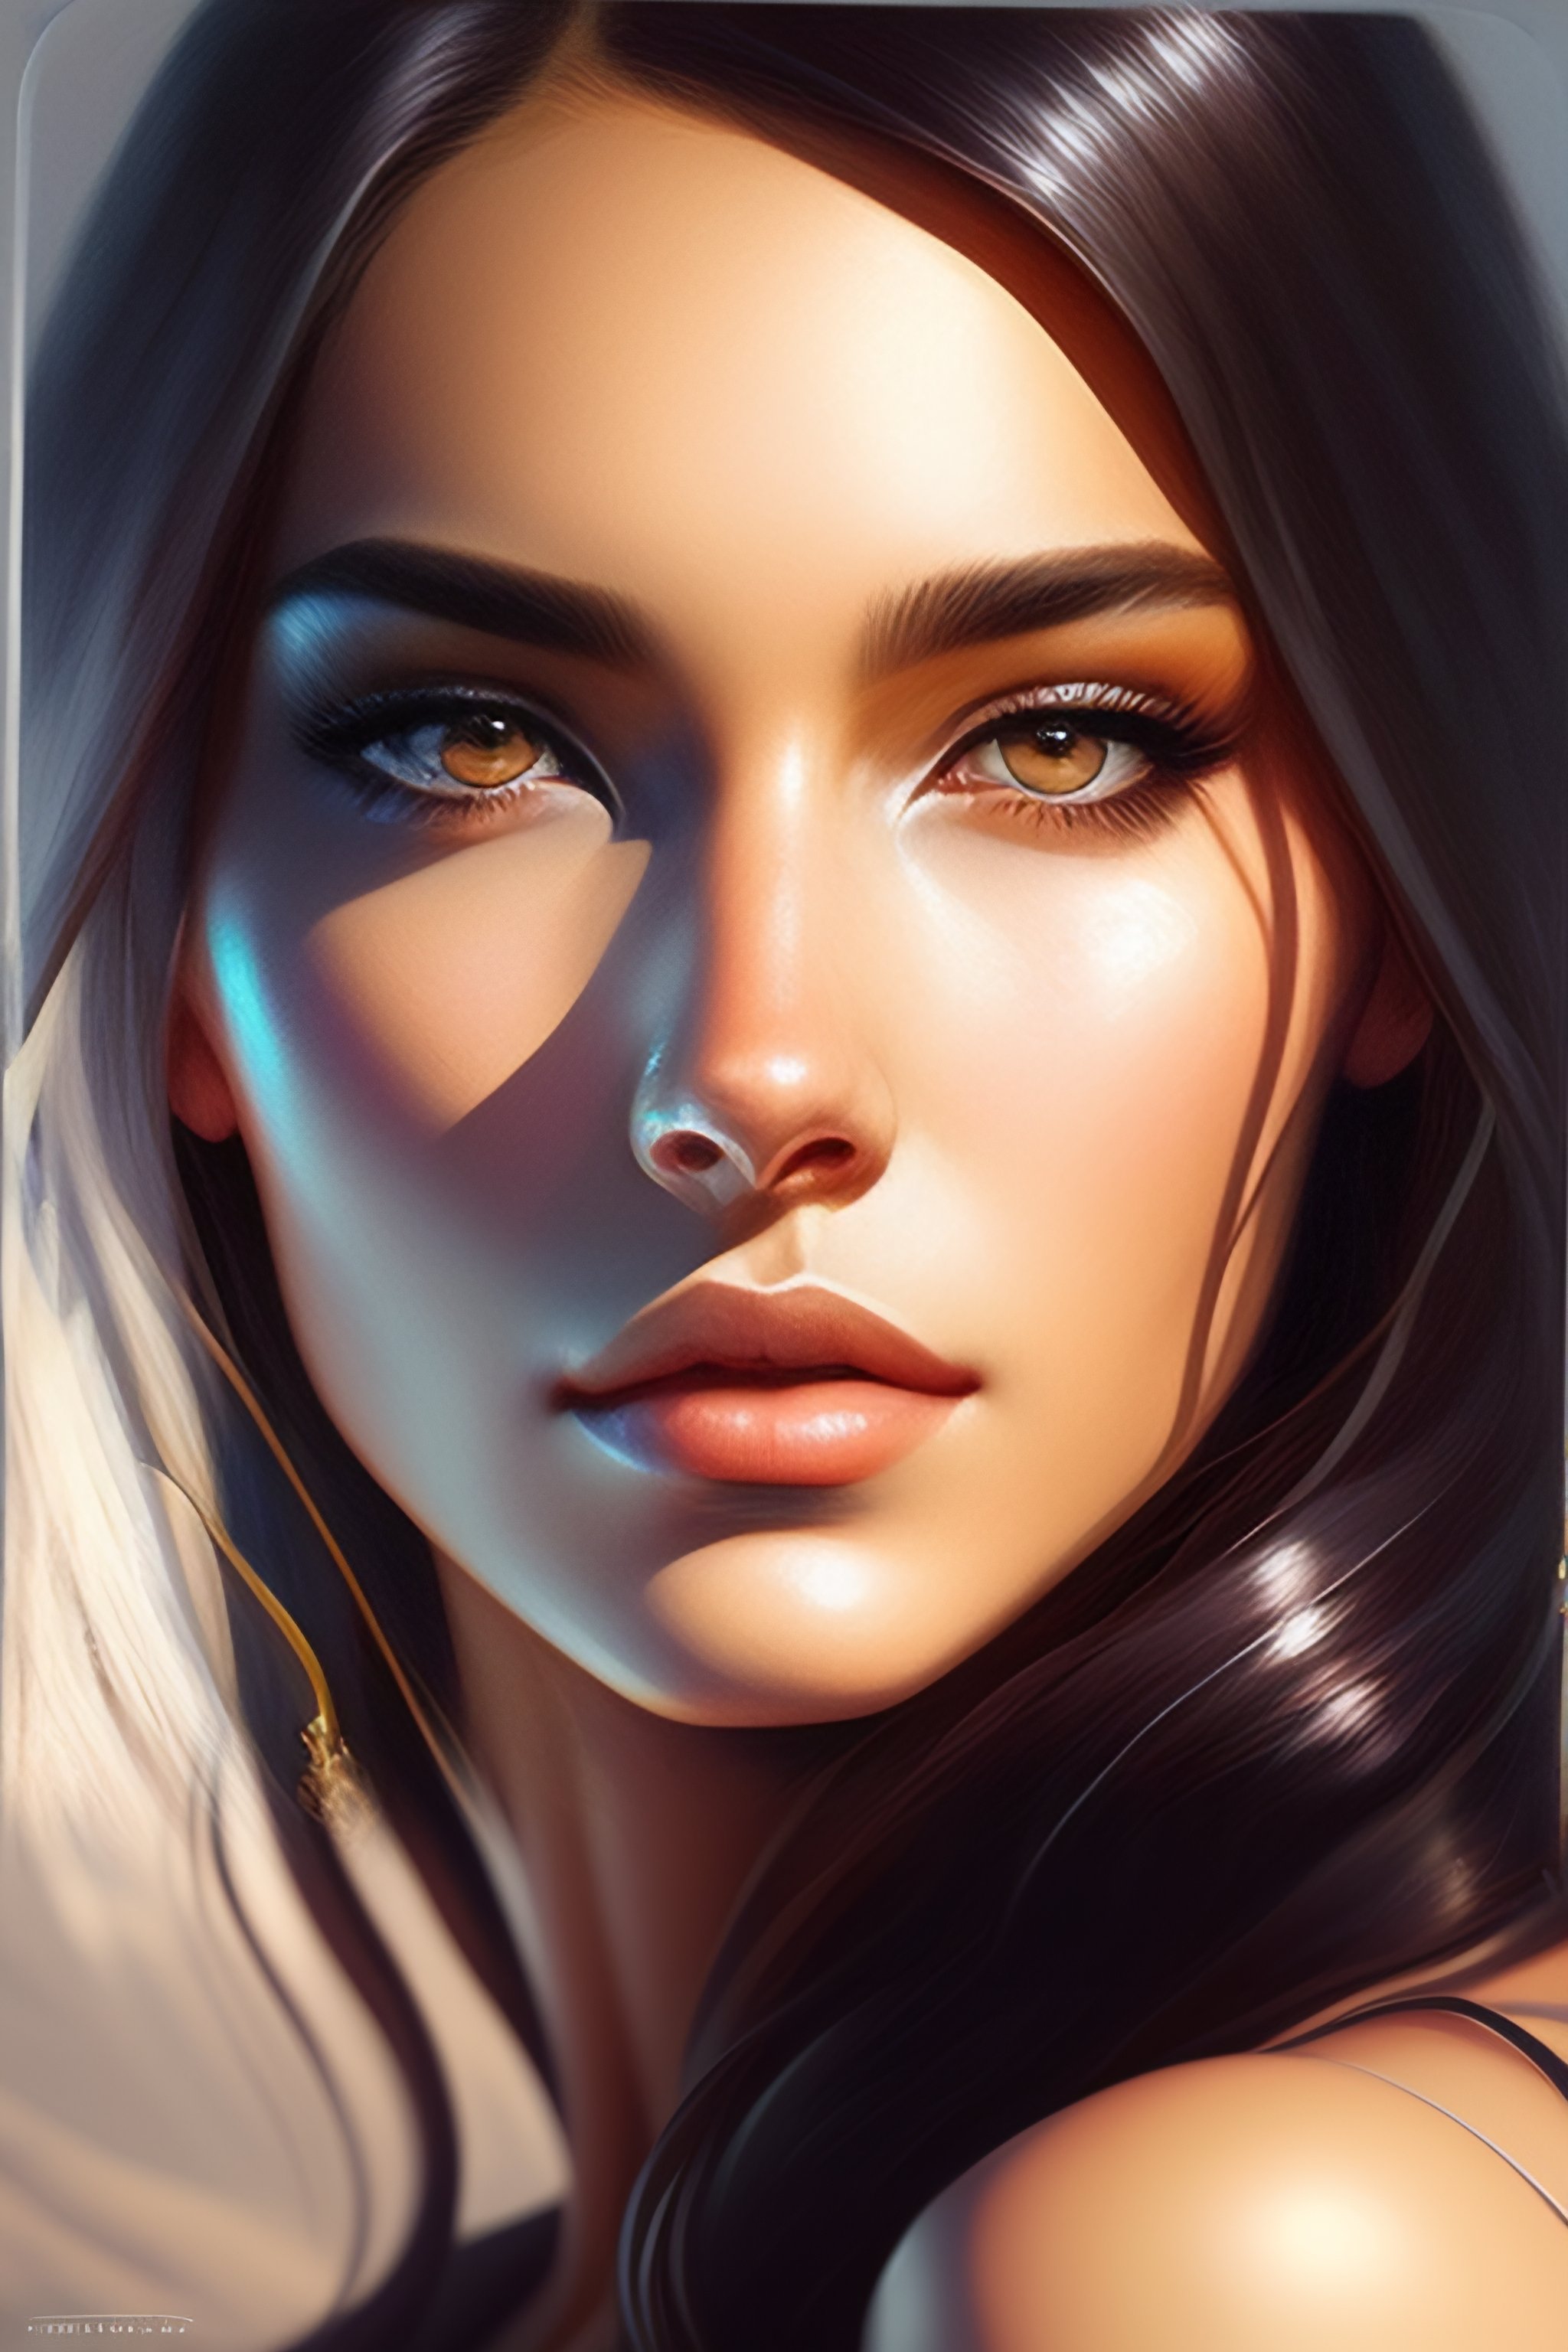 Lexica - Portrait, iceglow, highly detailed, digital painting ...